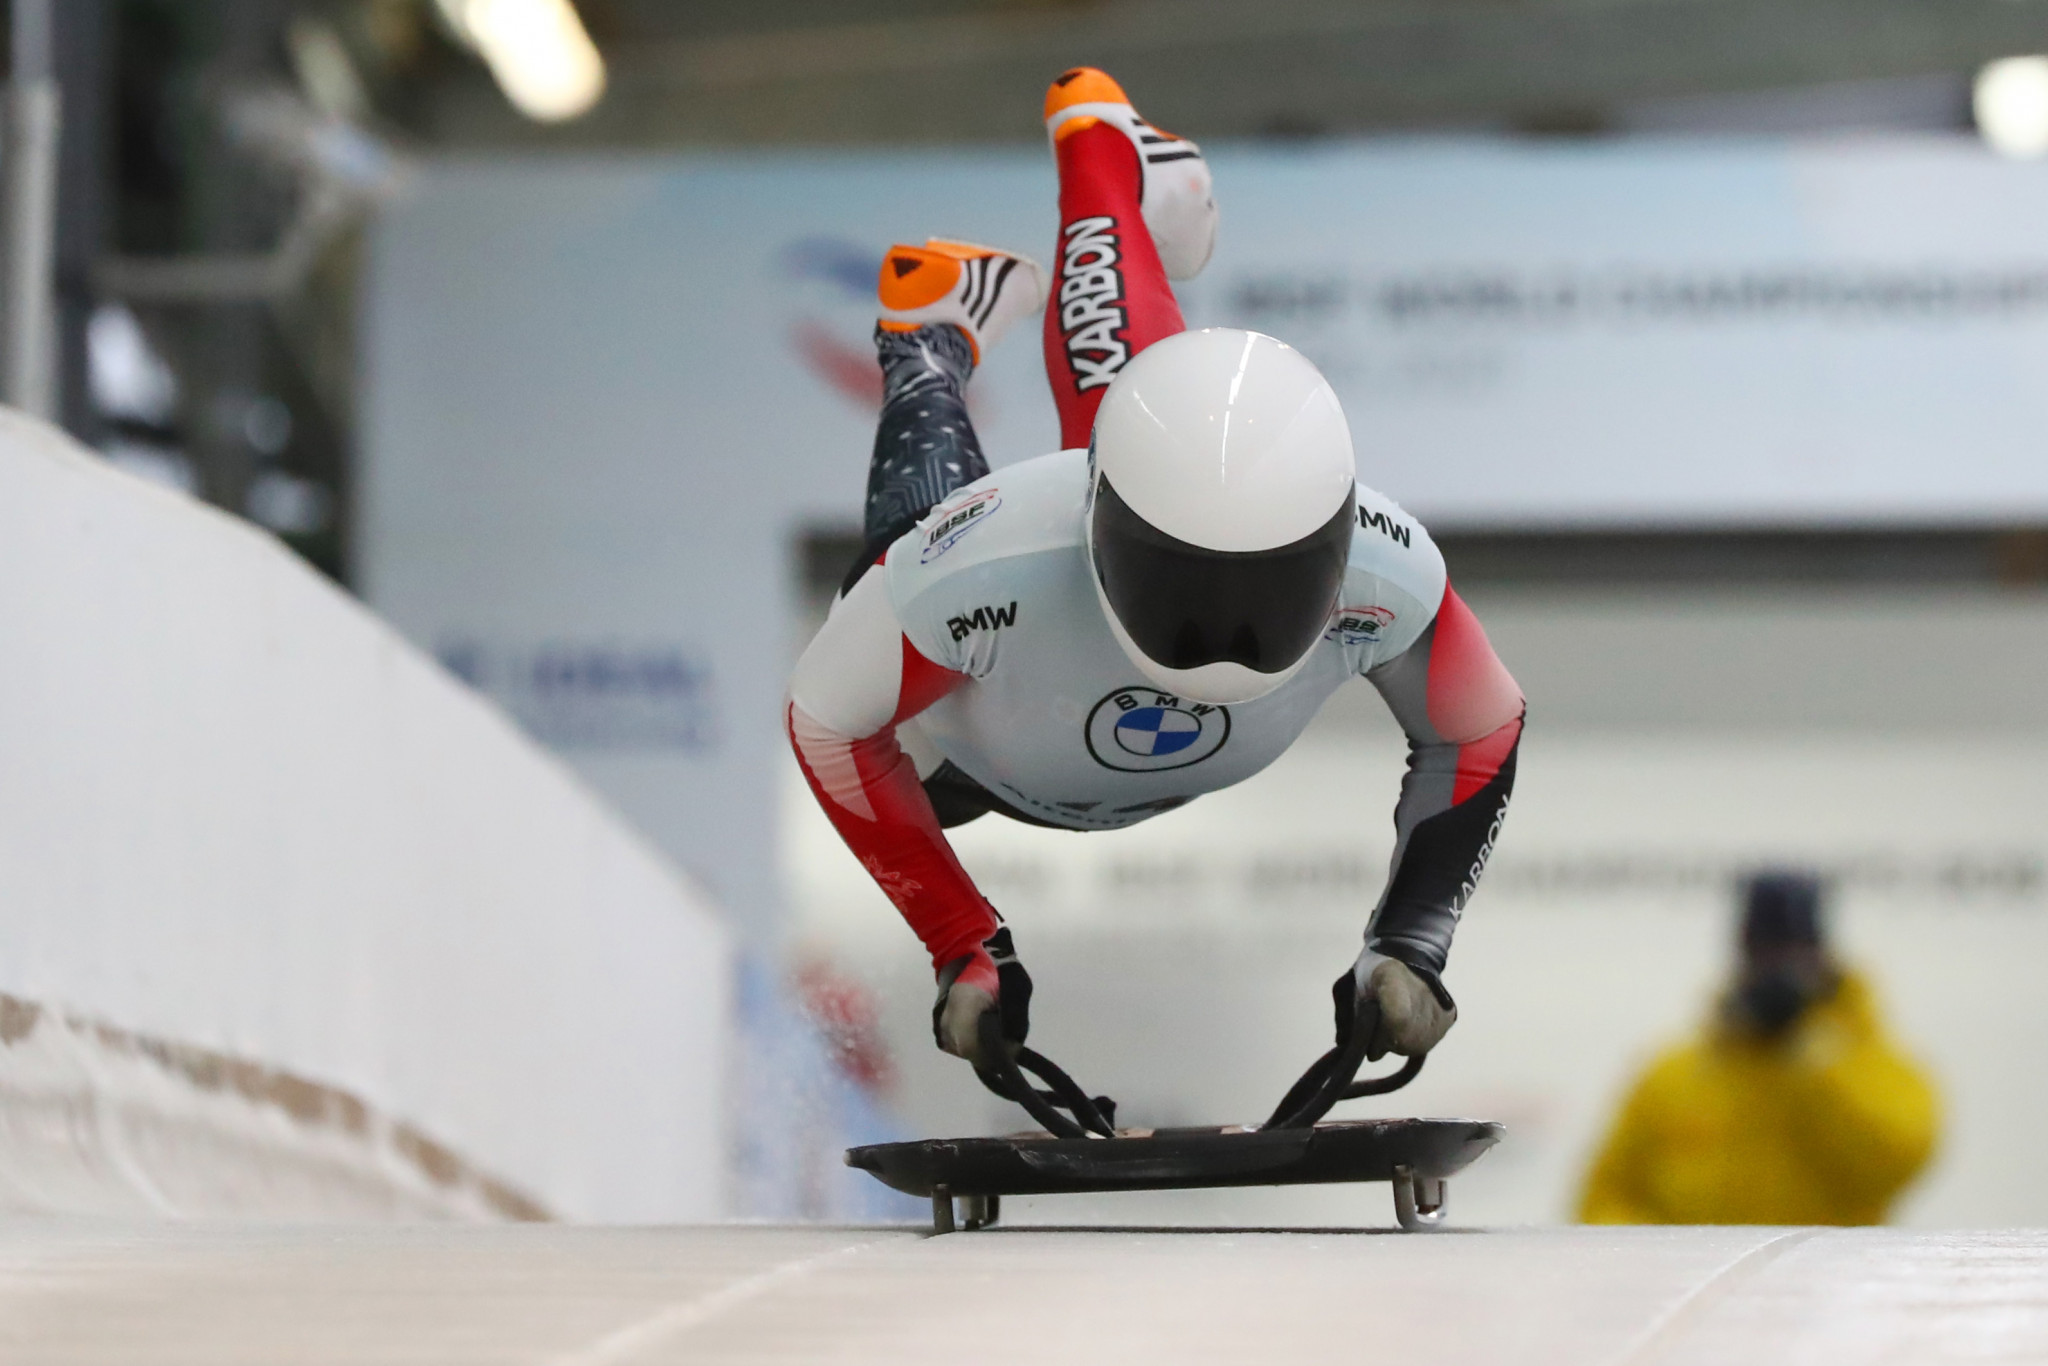 Elisabeth Maier has retired from skeleton racing ©Getty Images